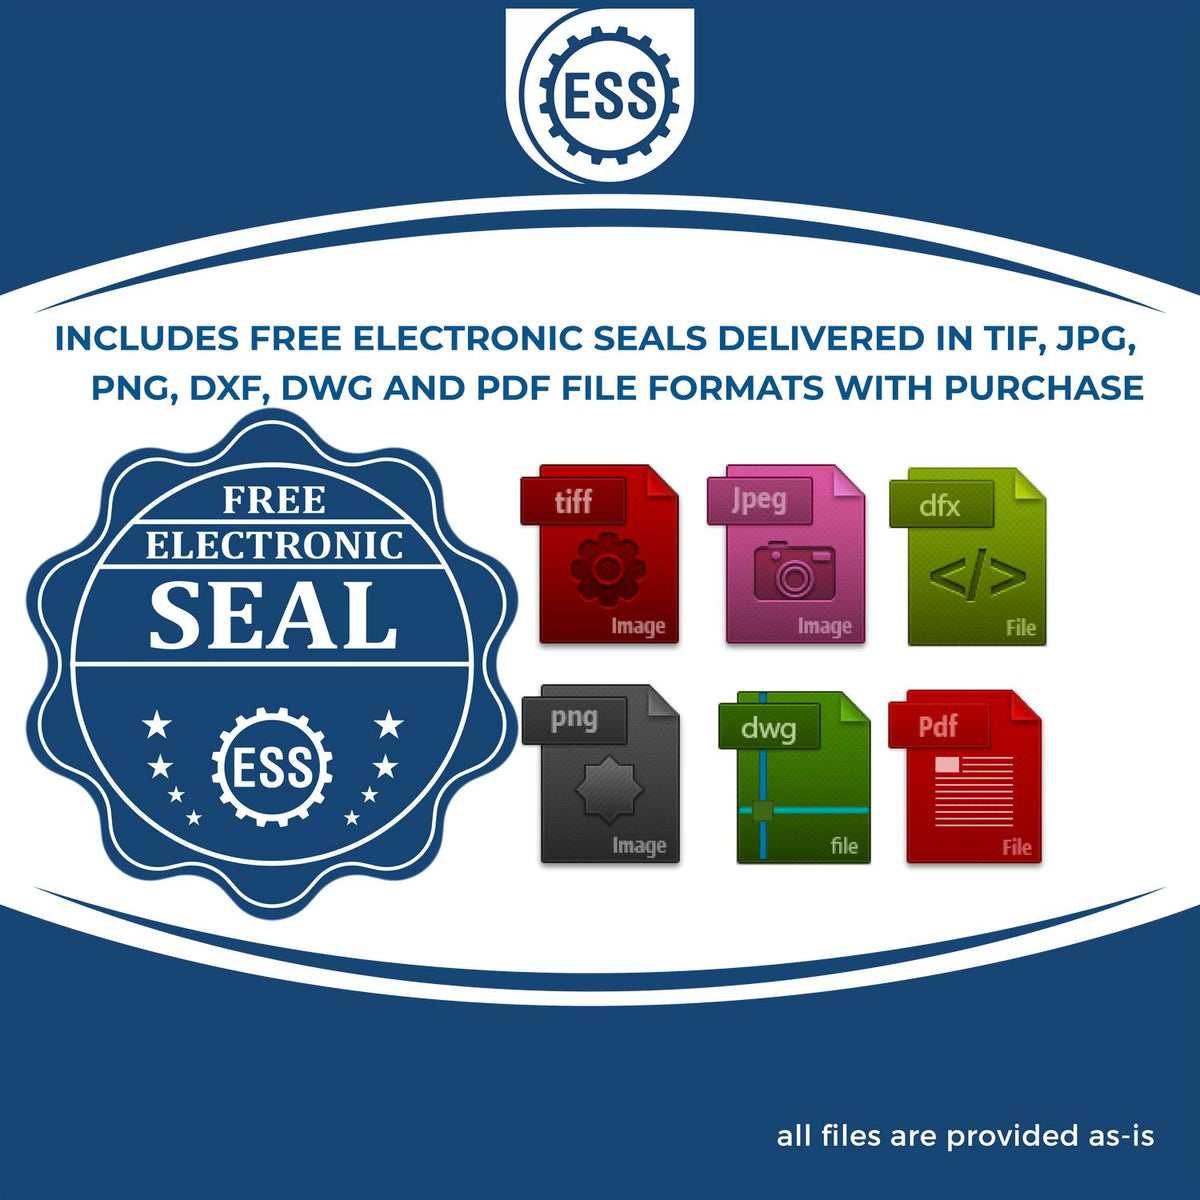 An infographic for the free electronic seal for the Nevada Desk Architect Embossing Seal illustrating the different file type icons such as DXF, DWG, TIF, JPG and PNG.